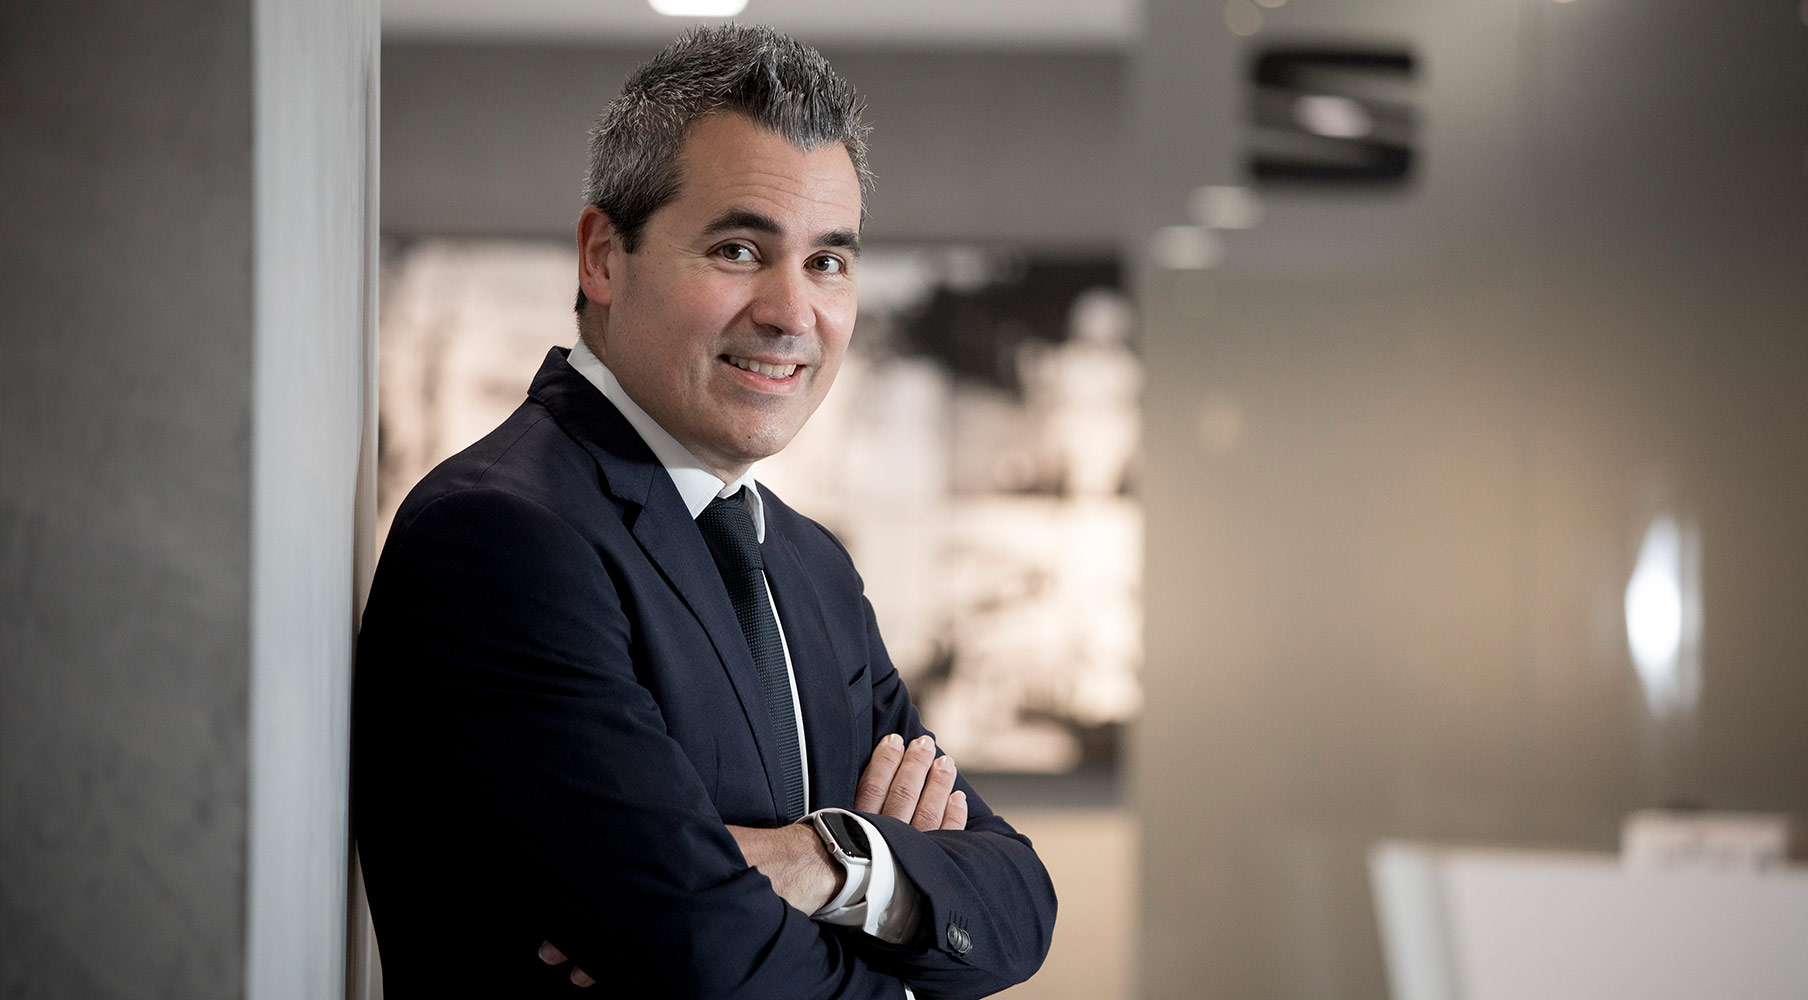 SEAT names Josep Maria Recasens new Director of Strategy and Institutional Relations.